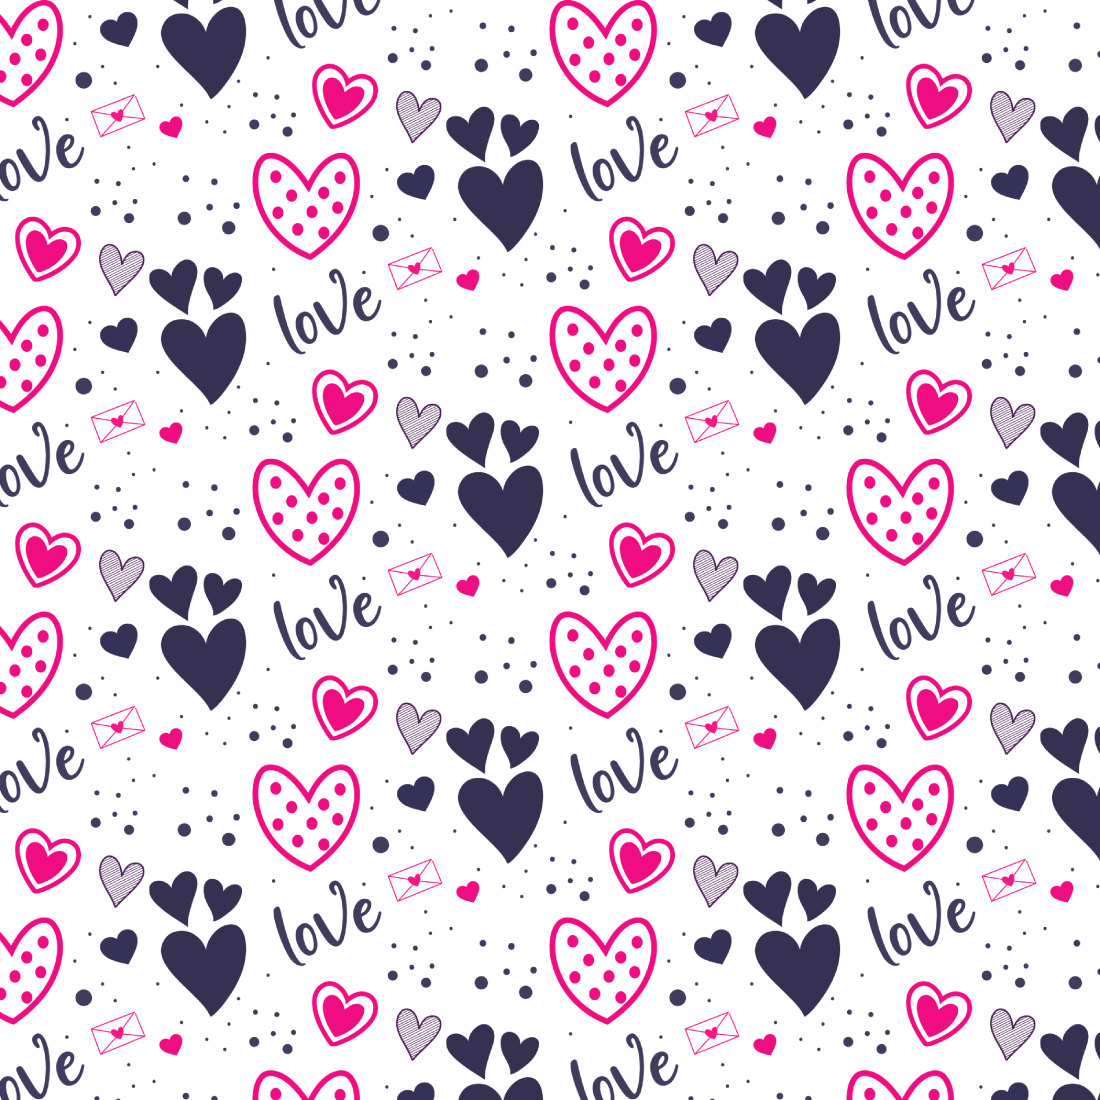 vector hand drawn valentines day pattern collection cover image.